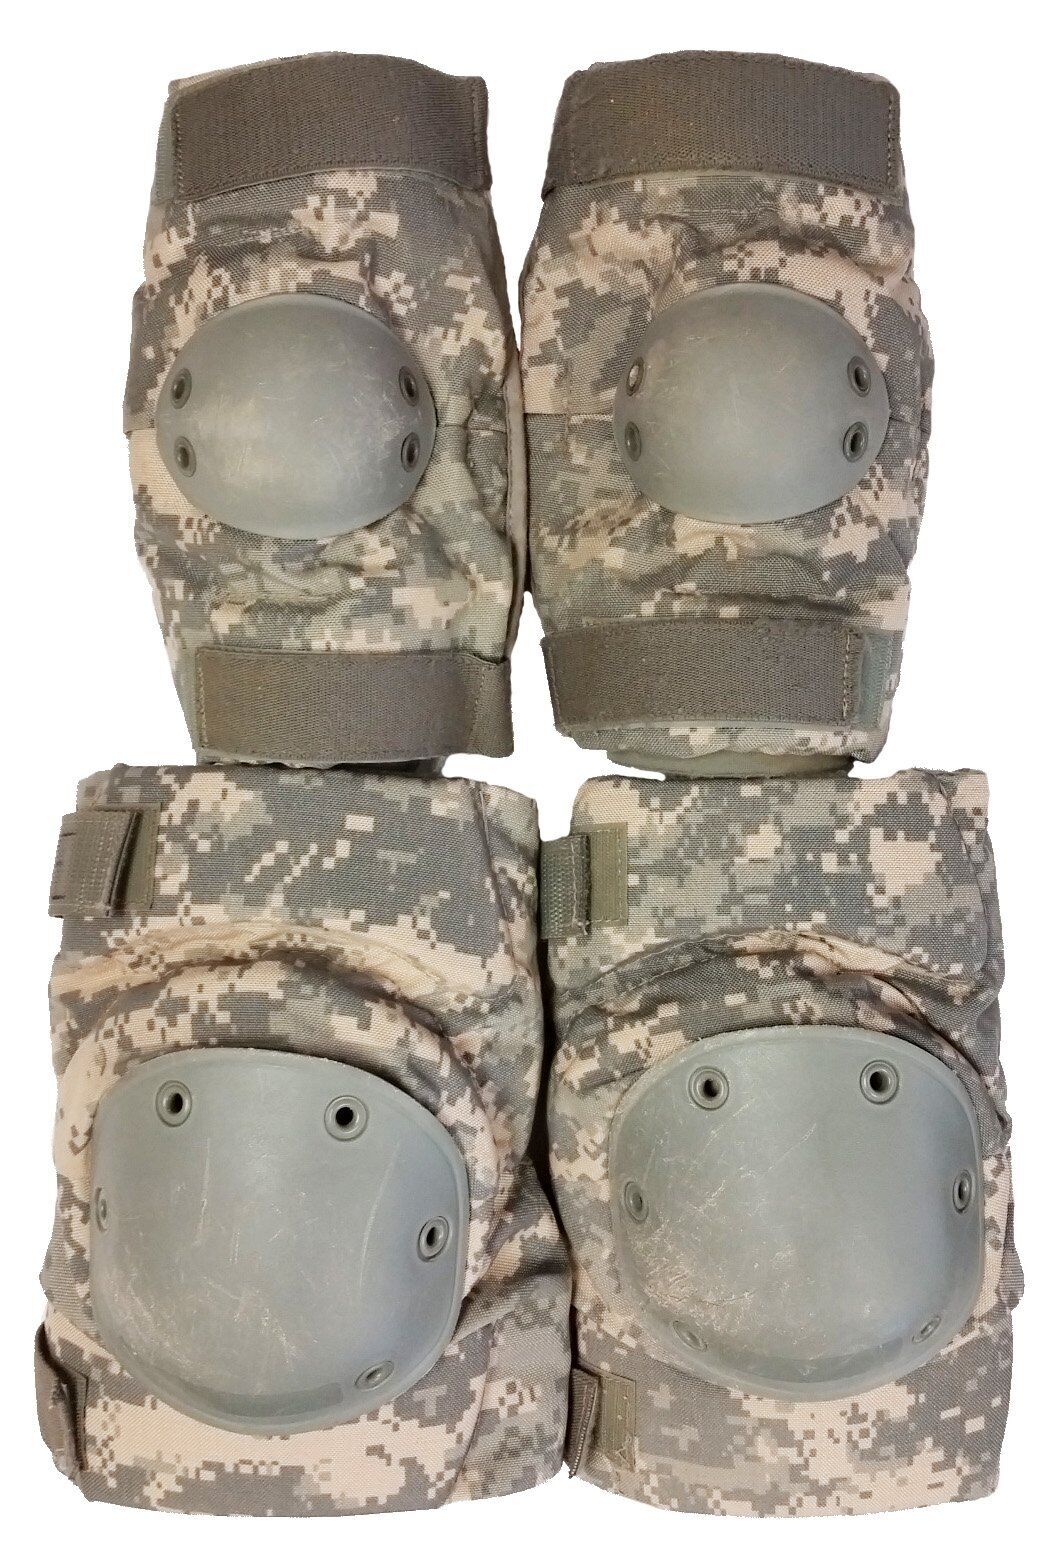 1053-O Previously Issued U.S. G.I. ACU Knee and Elbow Pad Set (Old Style)